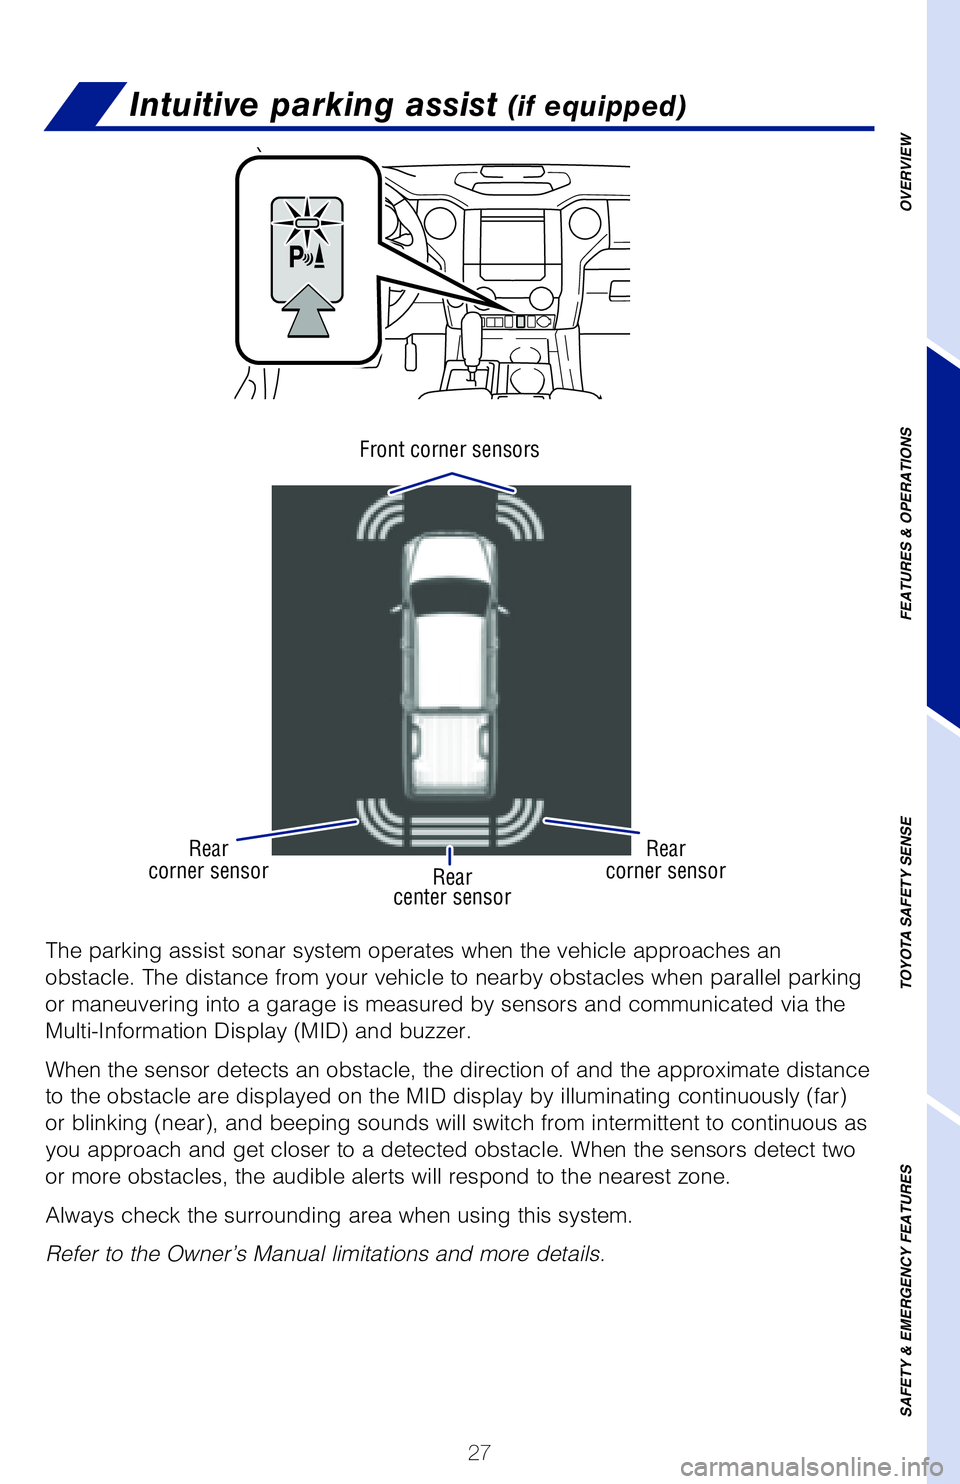 TOYOTA TUNDRA 2021  Owners Manual (in English) 27
The BSM is a system that has two functions:
• The Blind Spot Monitor function (assists the driver in decision ma\
king when changing lanes)
• The Rear Cross Traffic Alert function (assists the 